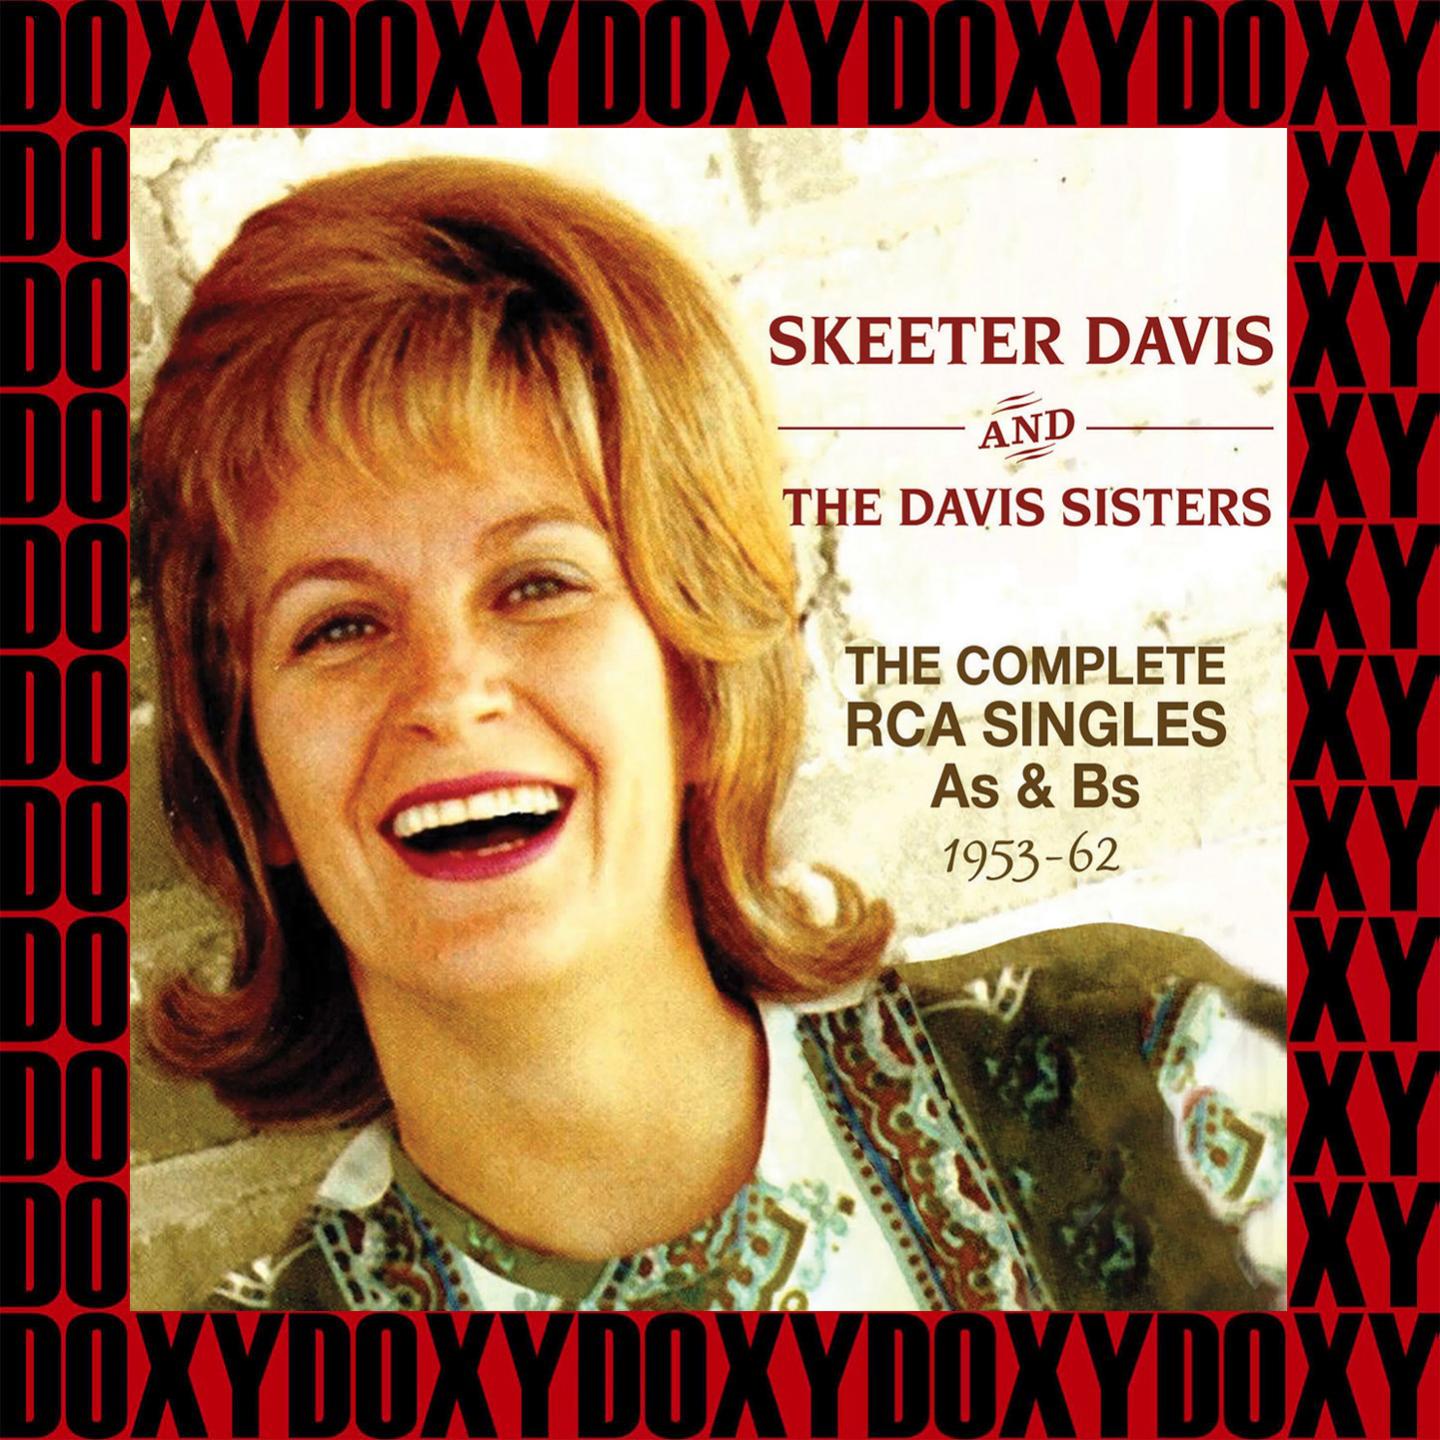 The Complete RCA Singles As & Bs 1953-1962 (Remastered Version) (Doxy Collection)